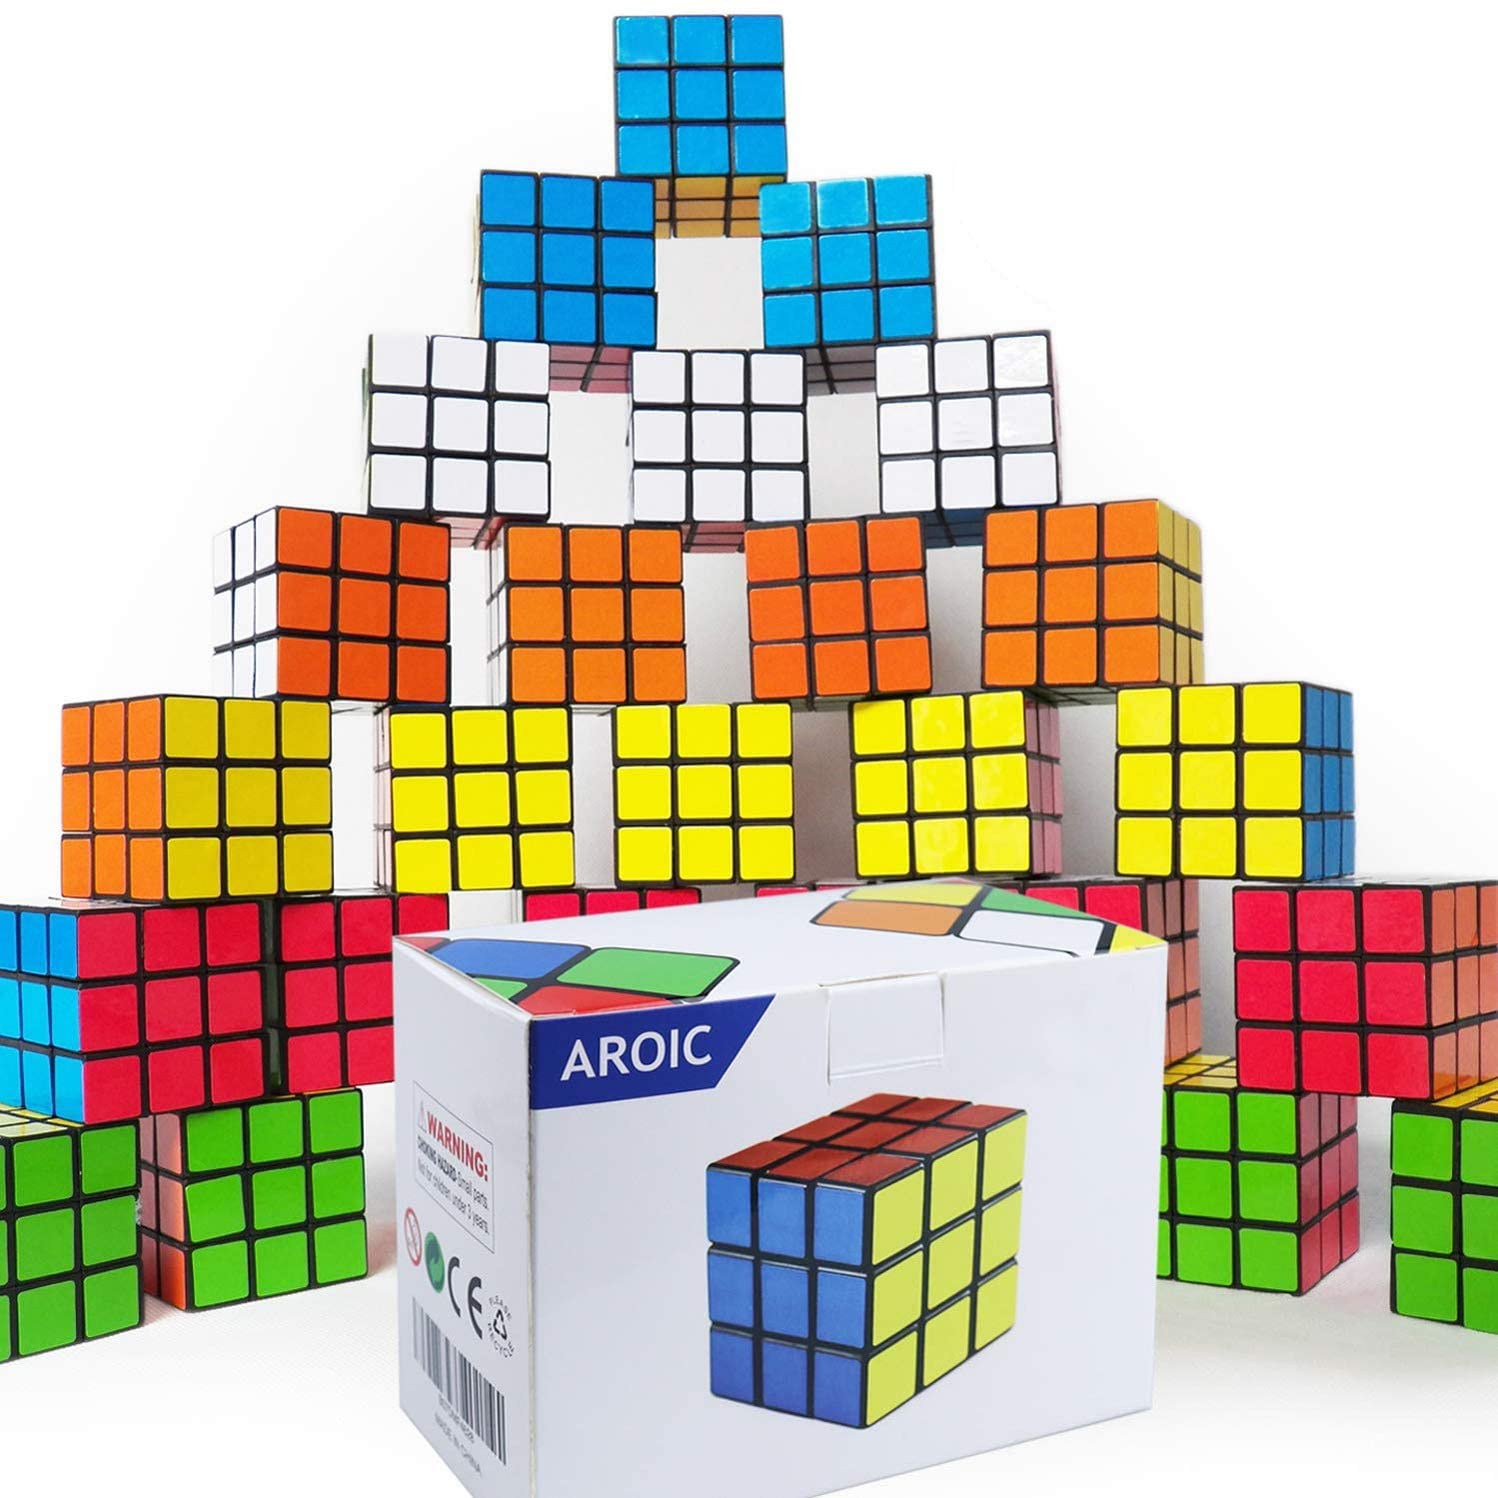 YCS Mini Cube Puzzle Game Set for Boy Girl Kid Child Eco-Friendly Material with Vivid Colors Magic Cube Goody Bag Filler Birthday Gift Puzzle Party Toy Pack of 18 